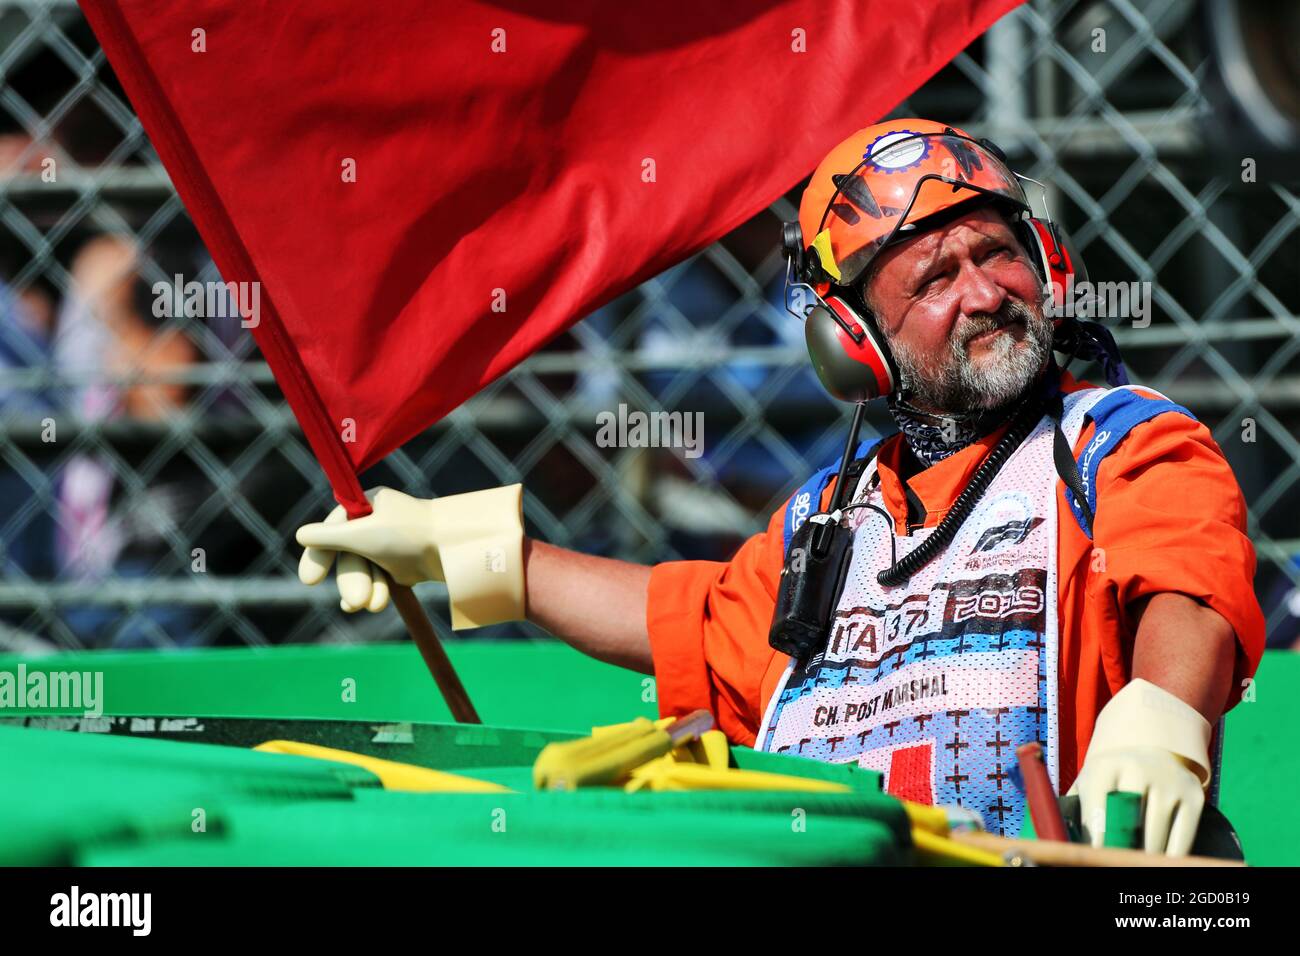 A marshal waves the red flag during qualifying. Italian Grand Prix, Saturday 7th September 2019. Monza Italy. Stock Photo